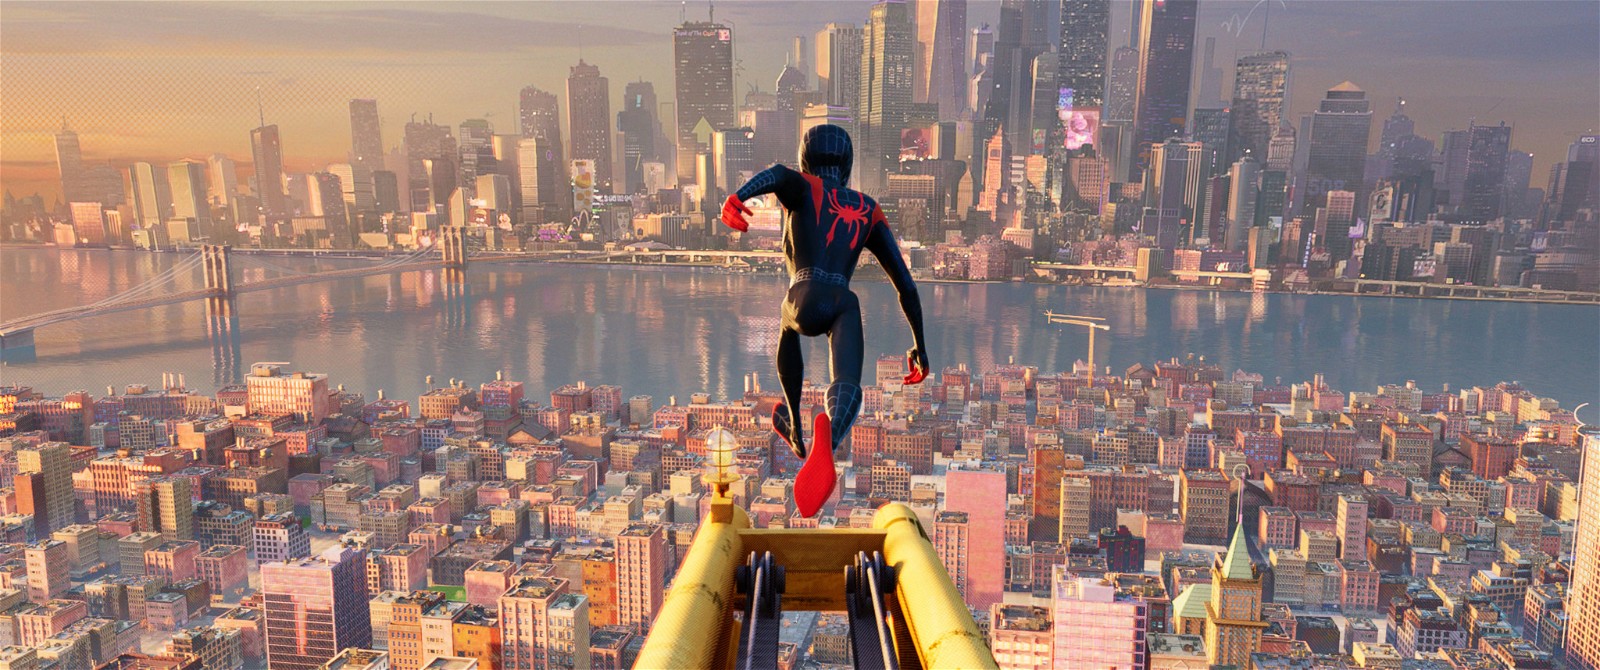 Miles Morales as Spider-Man in Sony Spider-Man: Into the Spider-verse. 